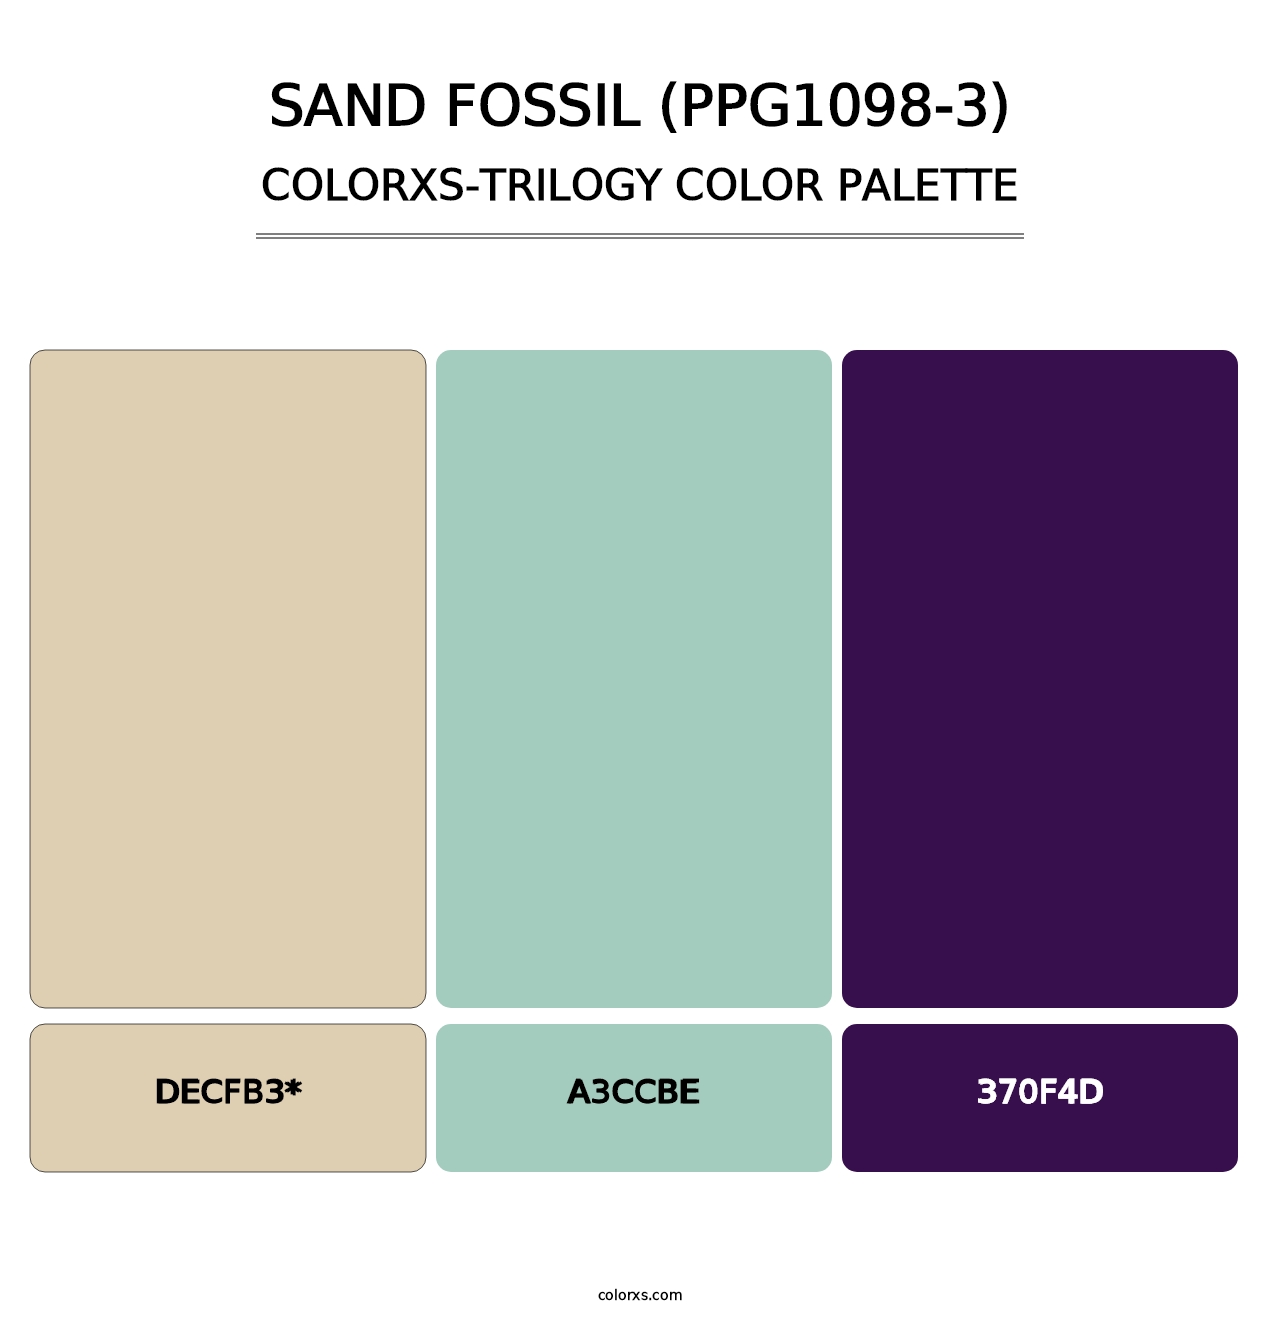 Sand Fossil (PPG1098-3) - Colorxs Trilogy Palette